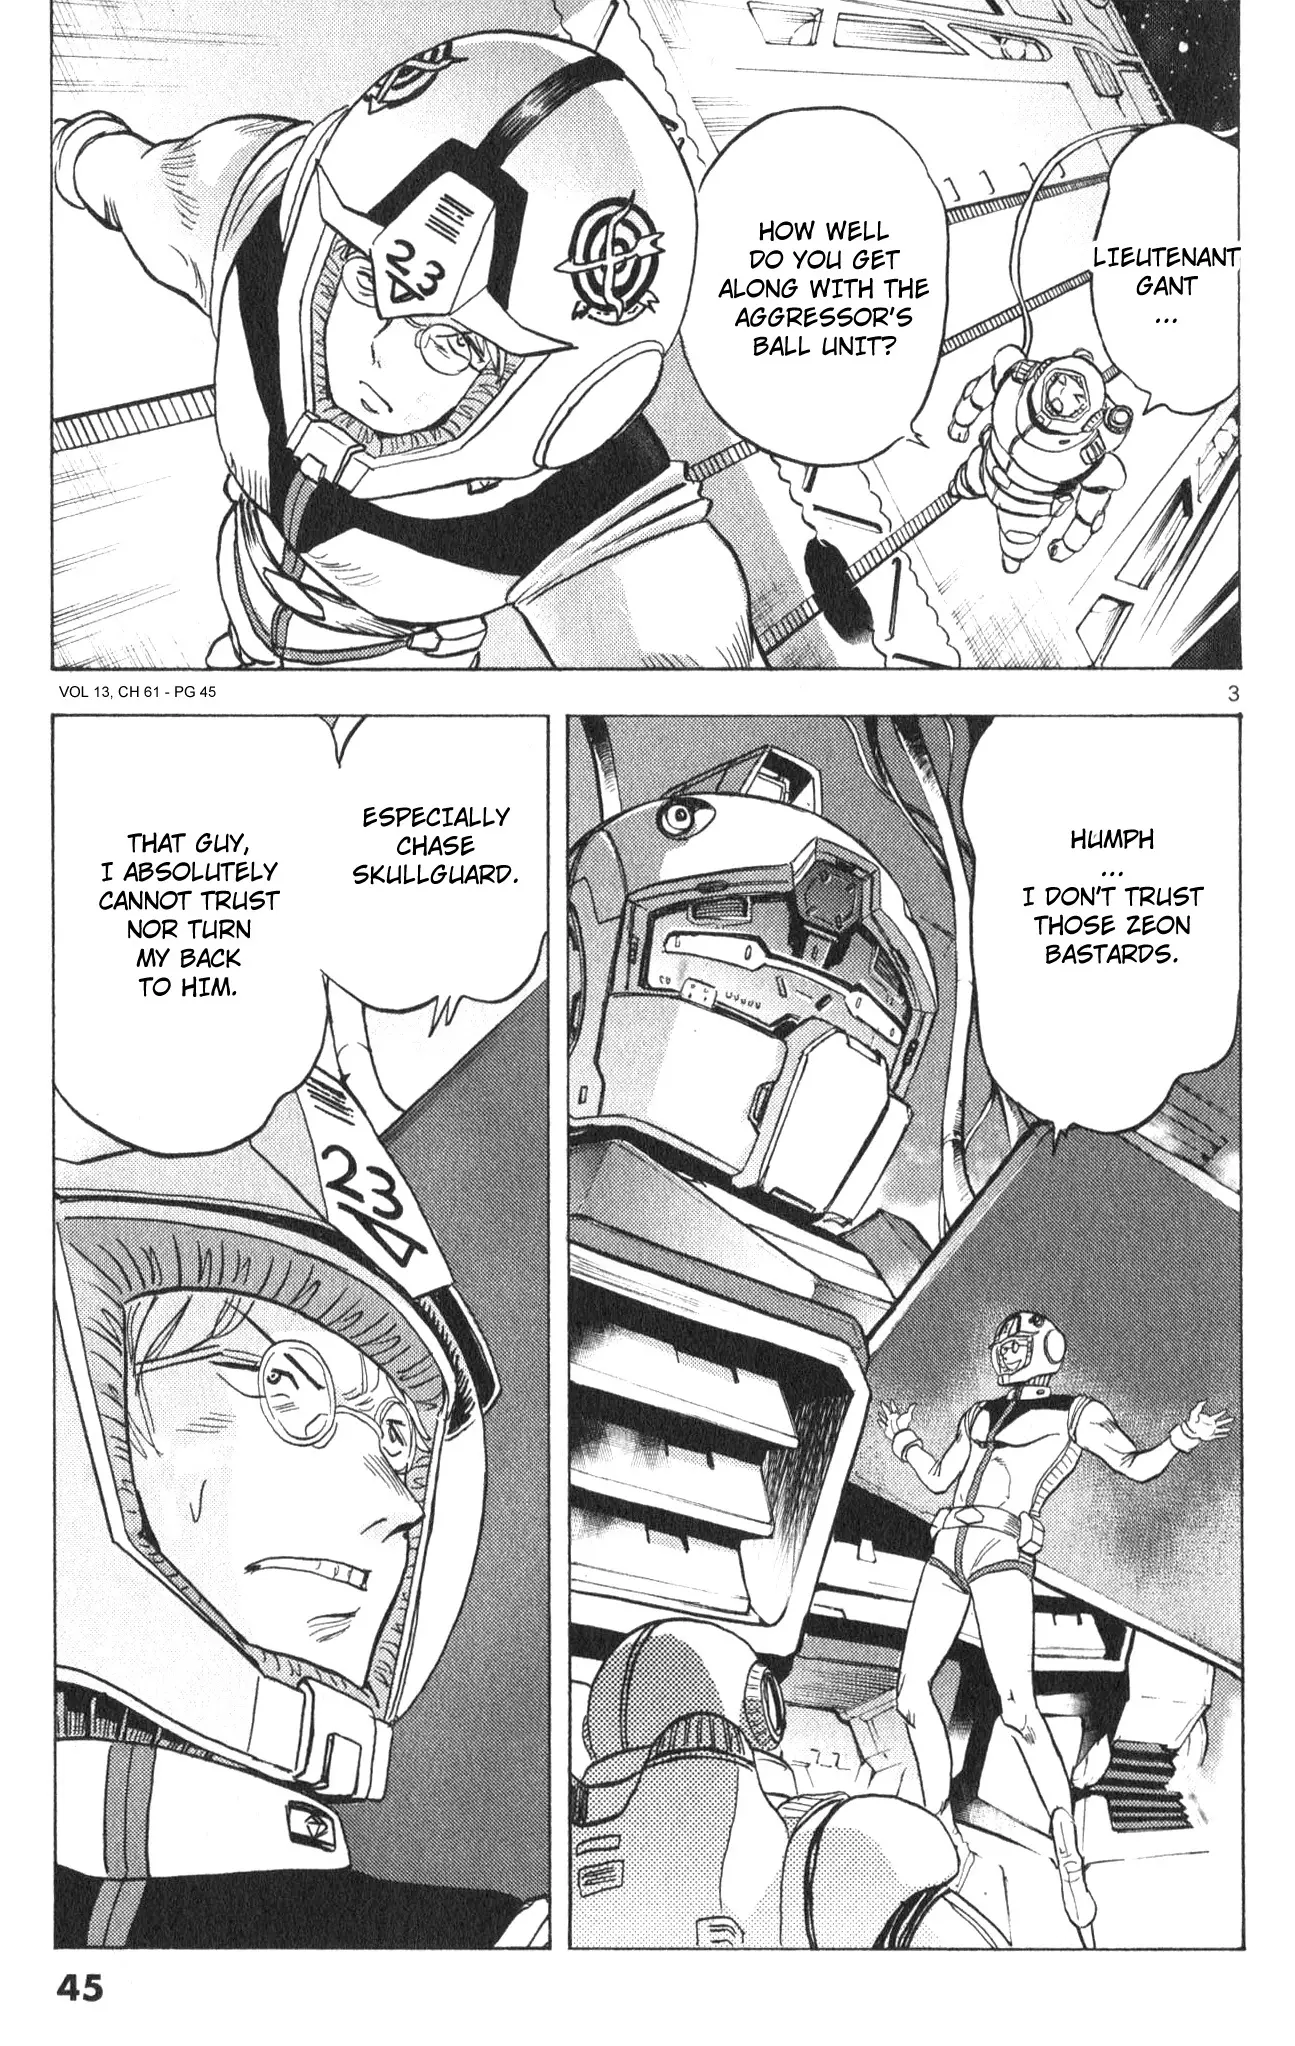 Mobile Suit Gundam Aggressor - 61 page 3-3aafb4d9